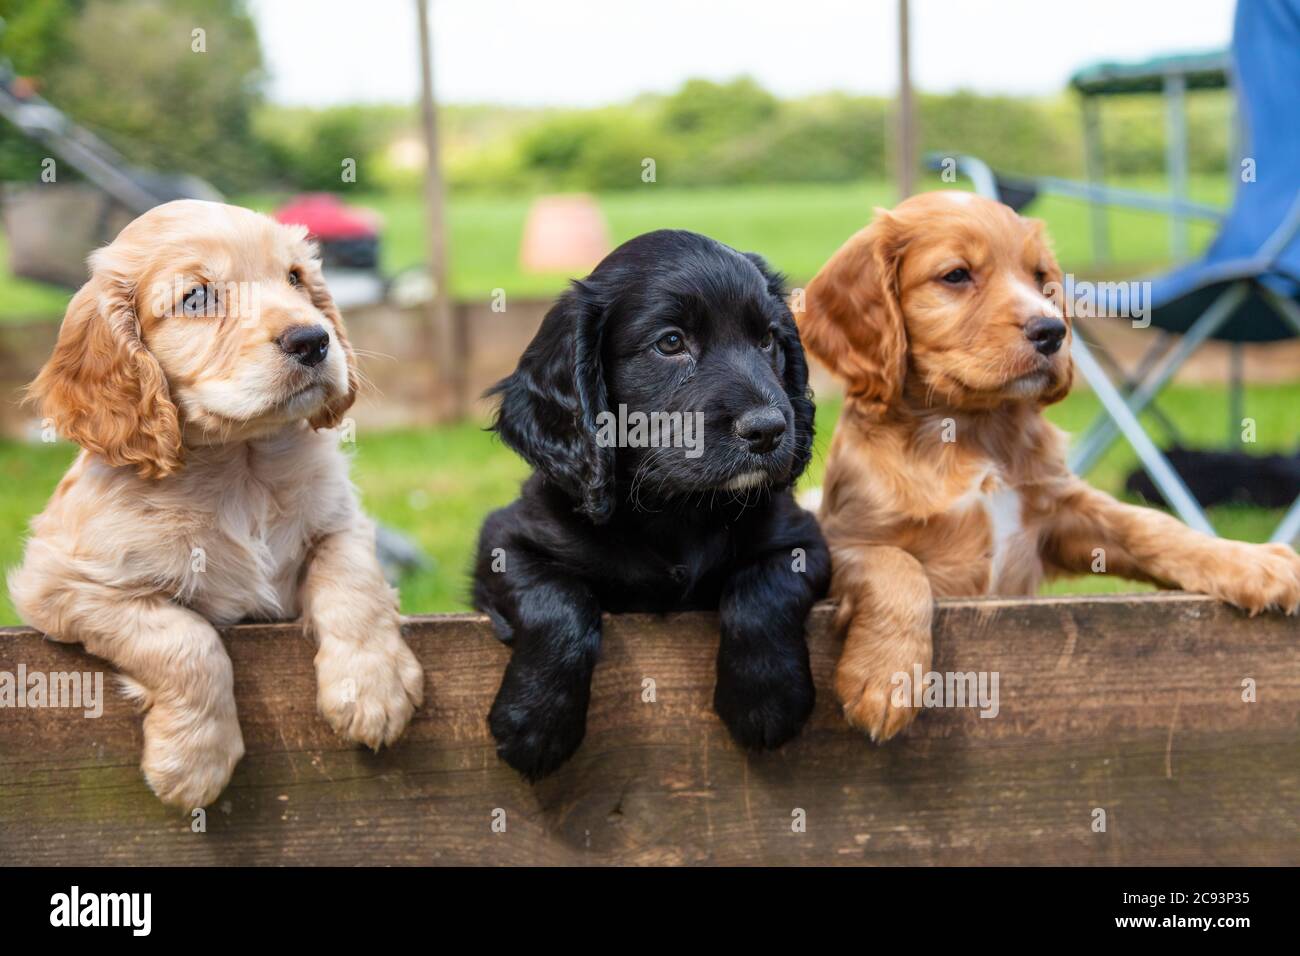 Three cute black and brown puppy dogs together leaning on a wooden fence outside Stock Photo